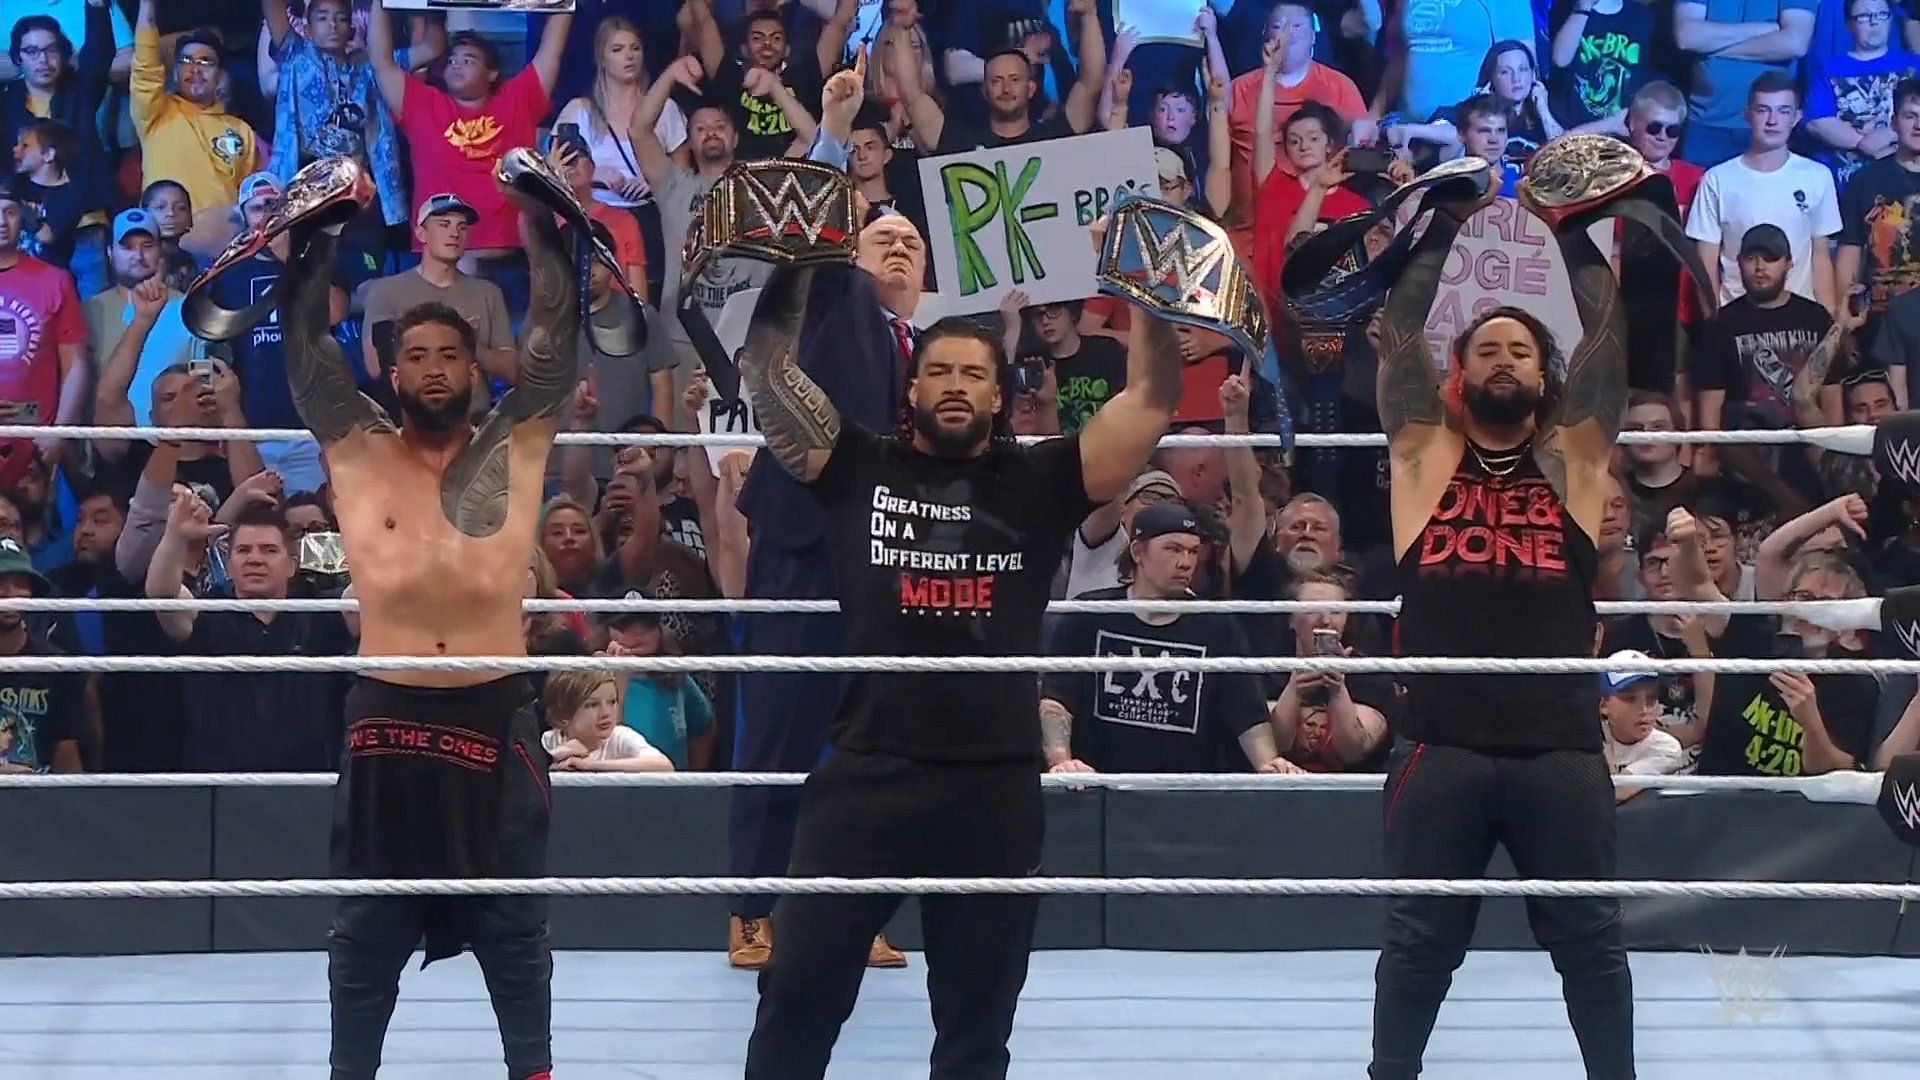 The Bloodline standing tall at the end of WWE SmackDown